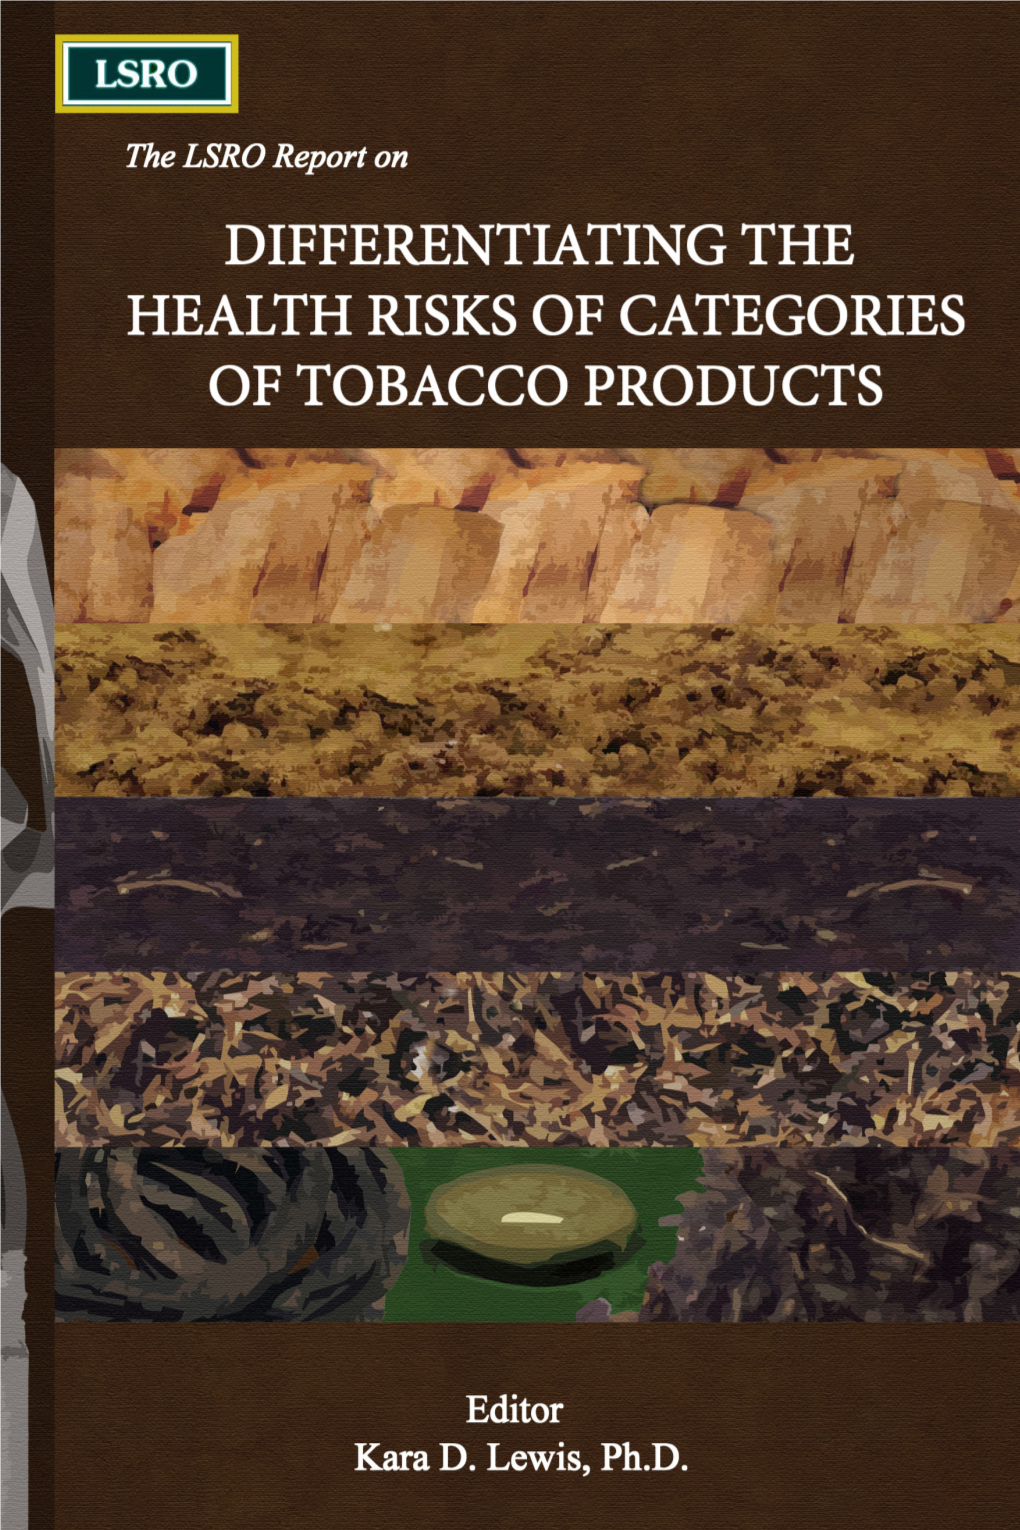 2008 Differentiating the Health Risks of Tobacco Products.Pdf